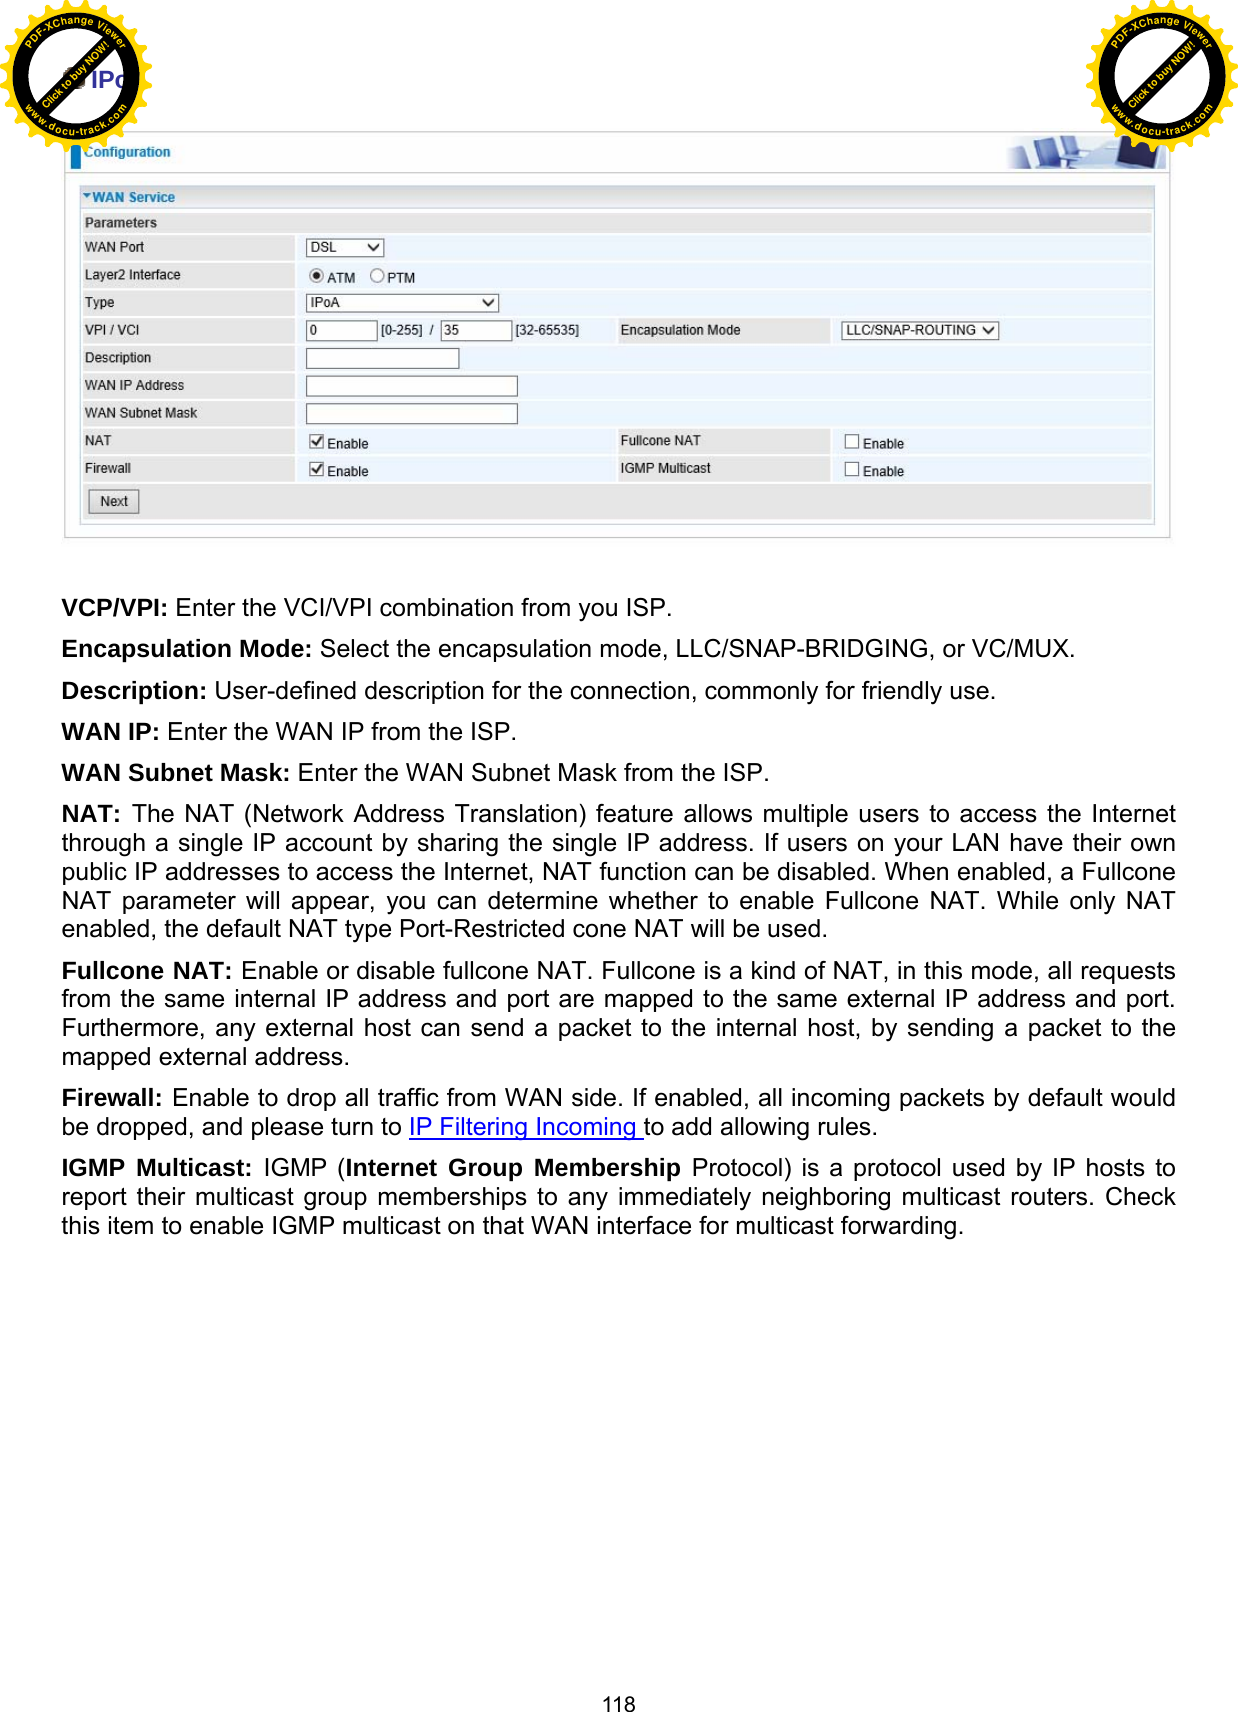  118  IPoA    VCP/VPI: Enter the VCI/VPI combination from you ISP.  Encapsulation Mode: Select the encapsulation mode, LLC/SNAP-BRIDGING, or VC/MUX. Description: User-defined description for the connection, commonly for friendly use. WAN IP: Enter the WAN IP from the ISP. WAN Subnet Mask: Enter the WAN Subnet Mask from the ISP. NAT: The NAT (Network Address Translation) feature allows multiple users to access the Internet through a single IP account by sharing the single IP address. If users on your LAN have their own public IP addresses to access the Internet, NAT function can be disabled. When enabled, a Fullcone NAT parameter will appear, you can determine whether to enable Fullcone NAT. While only NAT enabled, the default NAT type Port-Restricted cone NAT will be used.  Fullcone NAT: Enable or disable fullcone NAT. Fullcone is a kind of NAT, in this mode, all requests from the same internal IP address and port are mapped to the same external IP address and port. Furthermore, any external host can send a packet to the internal host, by sending a packet to the mapped external address. Firewall: Enable to drop all traffic from WAN side. If enabled, all incoming packets by default would be dropped, and please turn to IP Filtering Incoming to add allowing rules. IGMP Multicast: IGMP (Internet Group Membership Protocol) is a protocol used by IP hosts to report their multicast group memberships to any immediately neighboring multicast routers. Check this item to enable IGMP multicast on that WAN interface for multicast forwarding.             Click to buy NOW!PDF-XChange Viewerwww.docu-track.comClick to buy NOW!PDF-XChange Viewerwww.docu-track.com